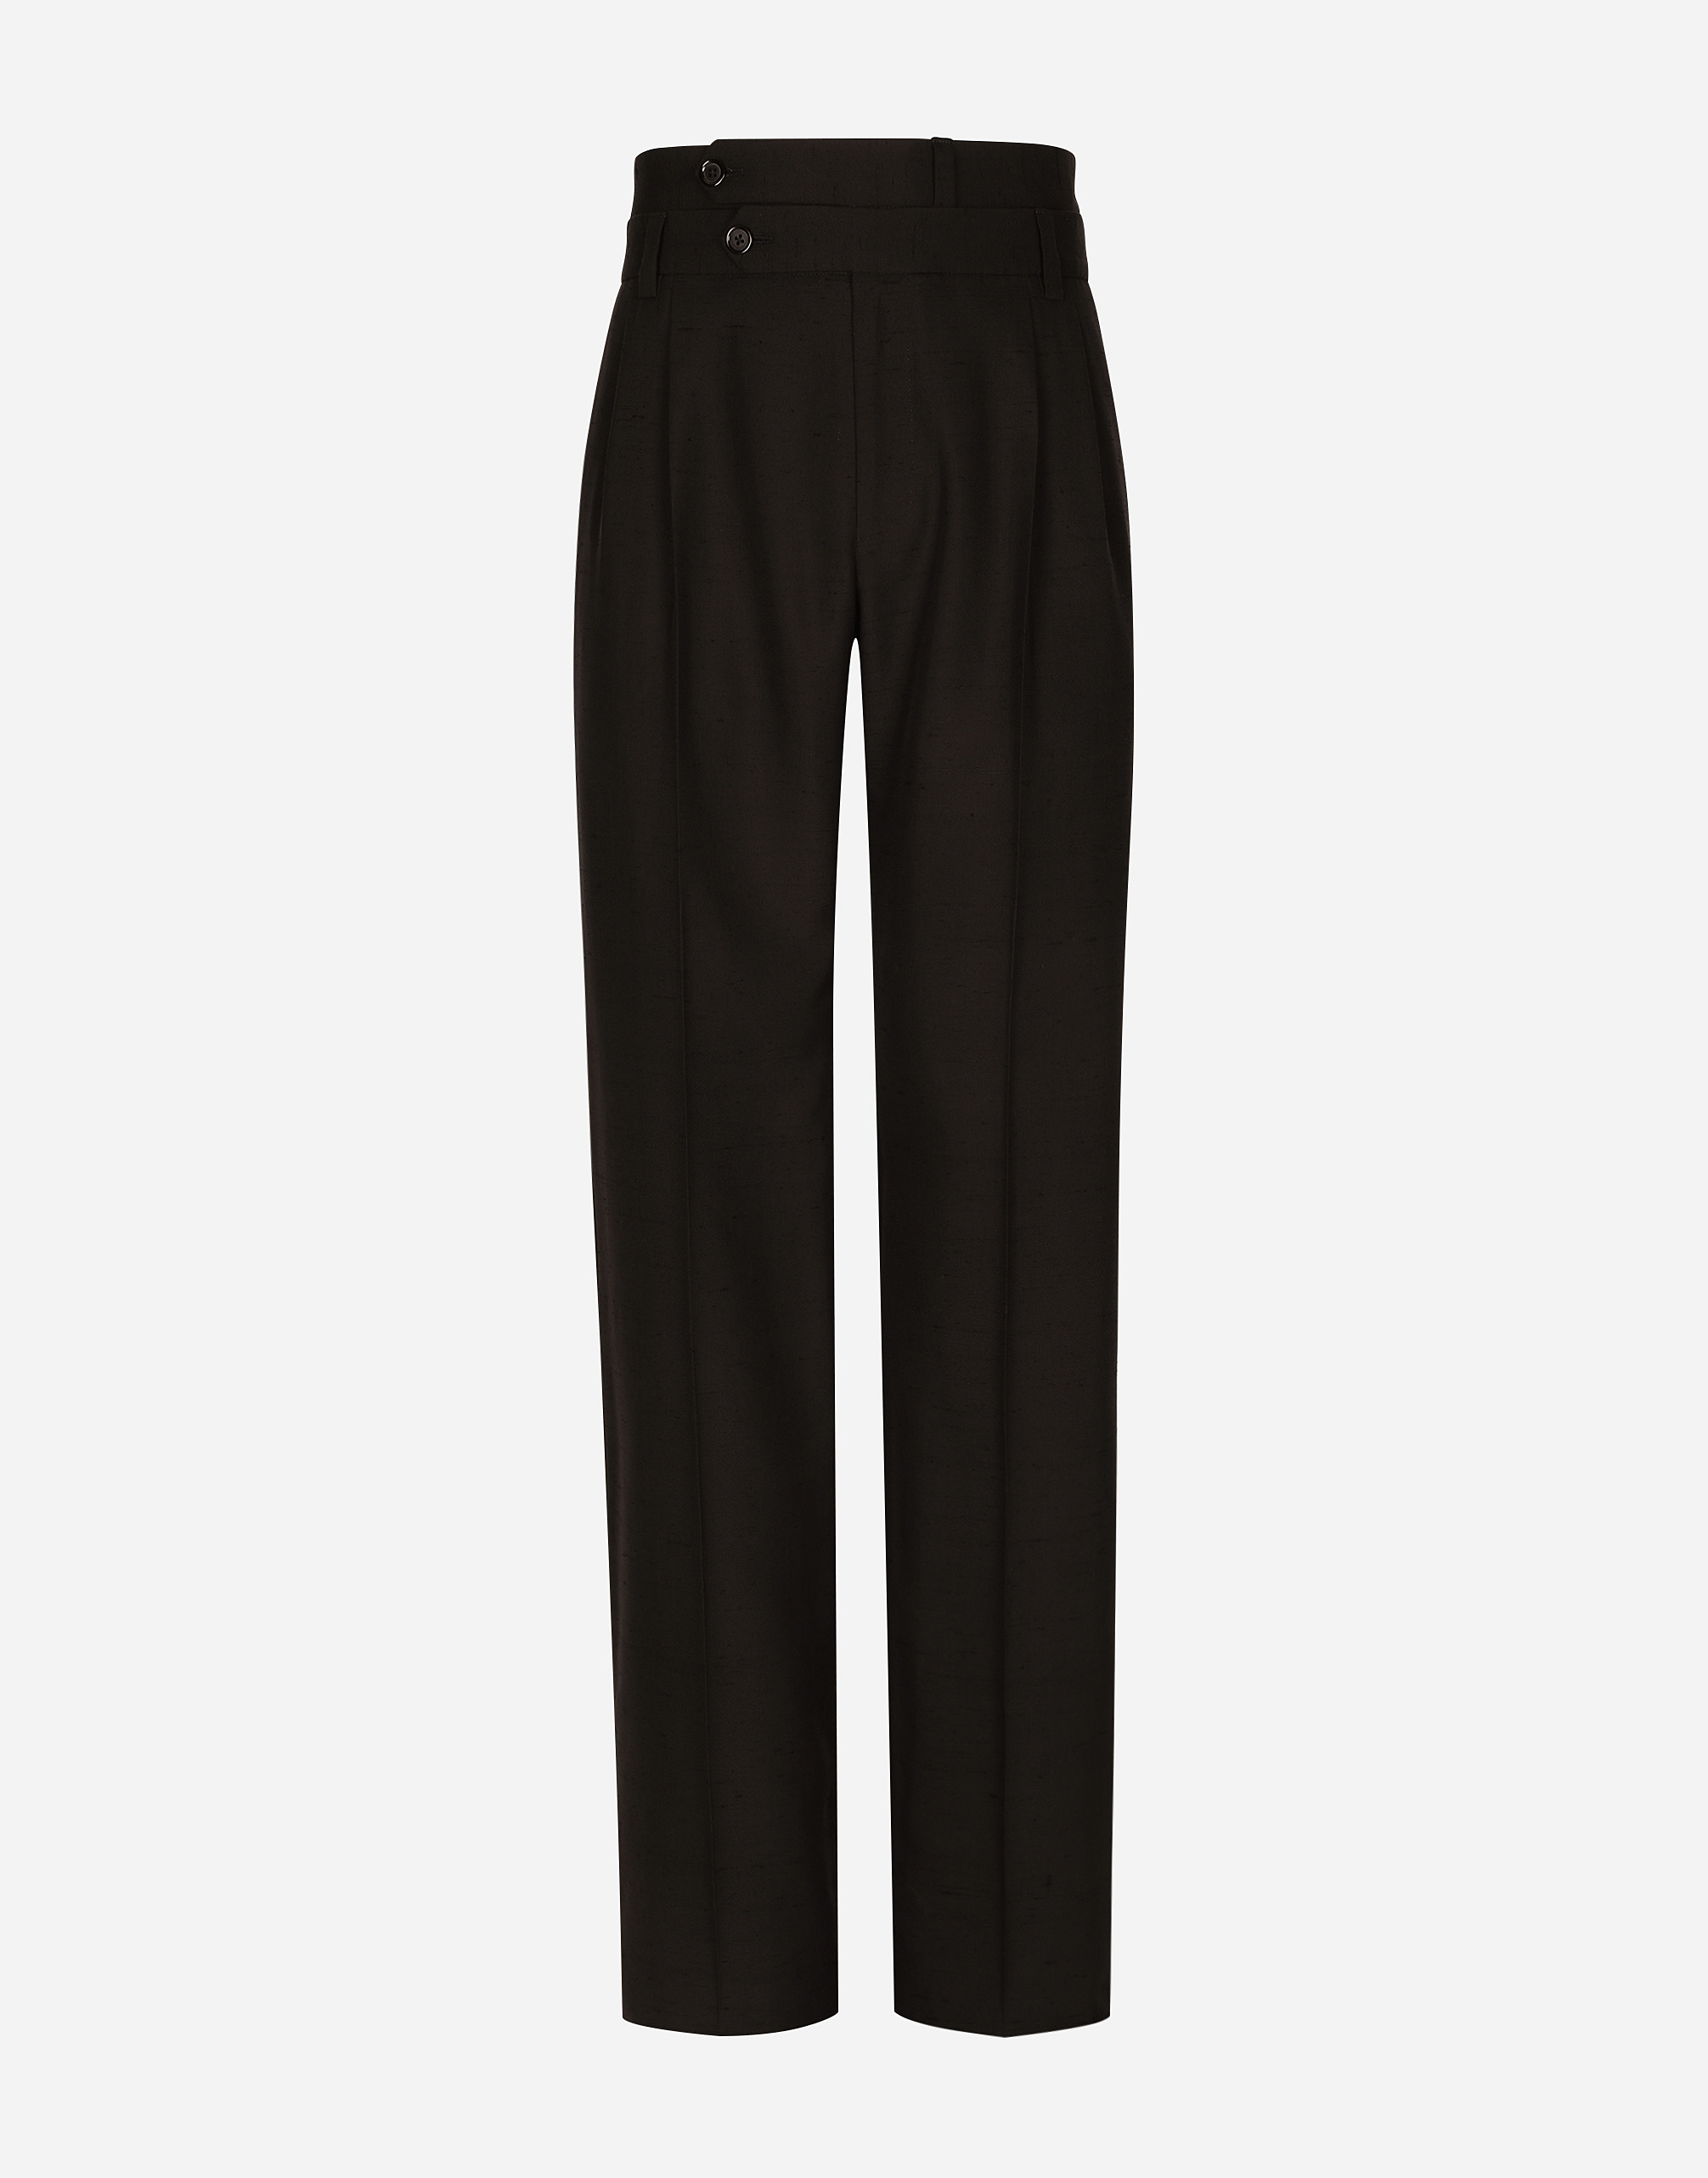 Dolce & Gabbana Tailored Shantung Silk And Cotton Pants In Black